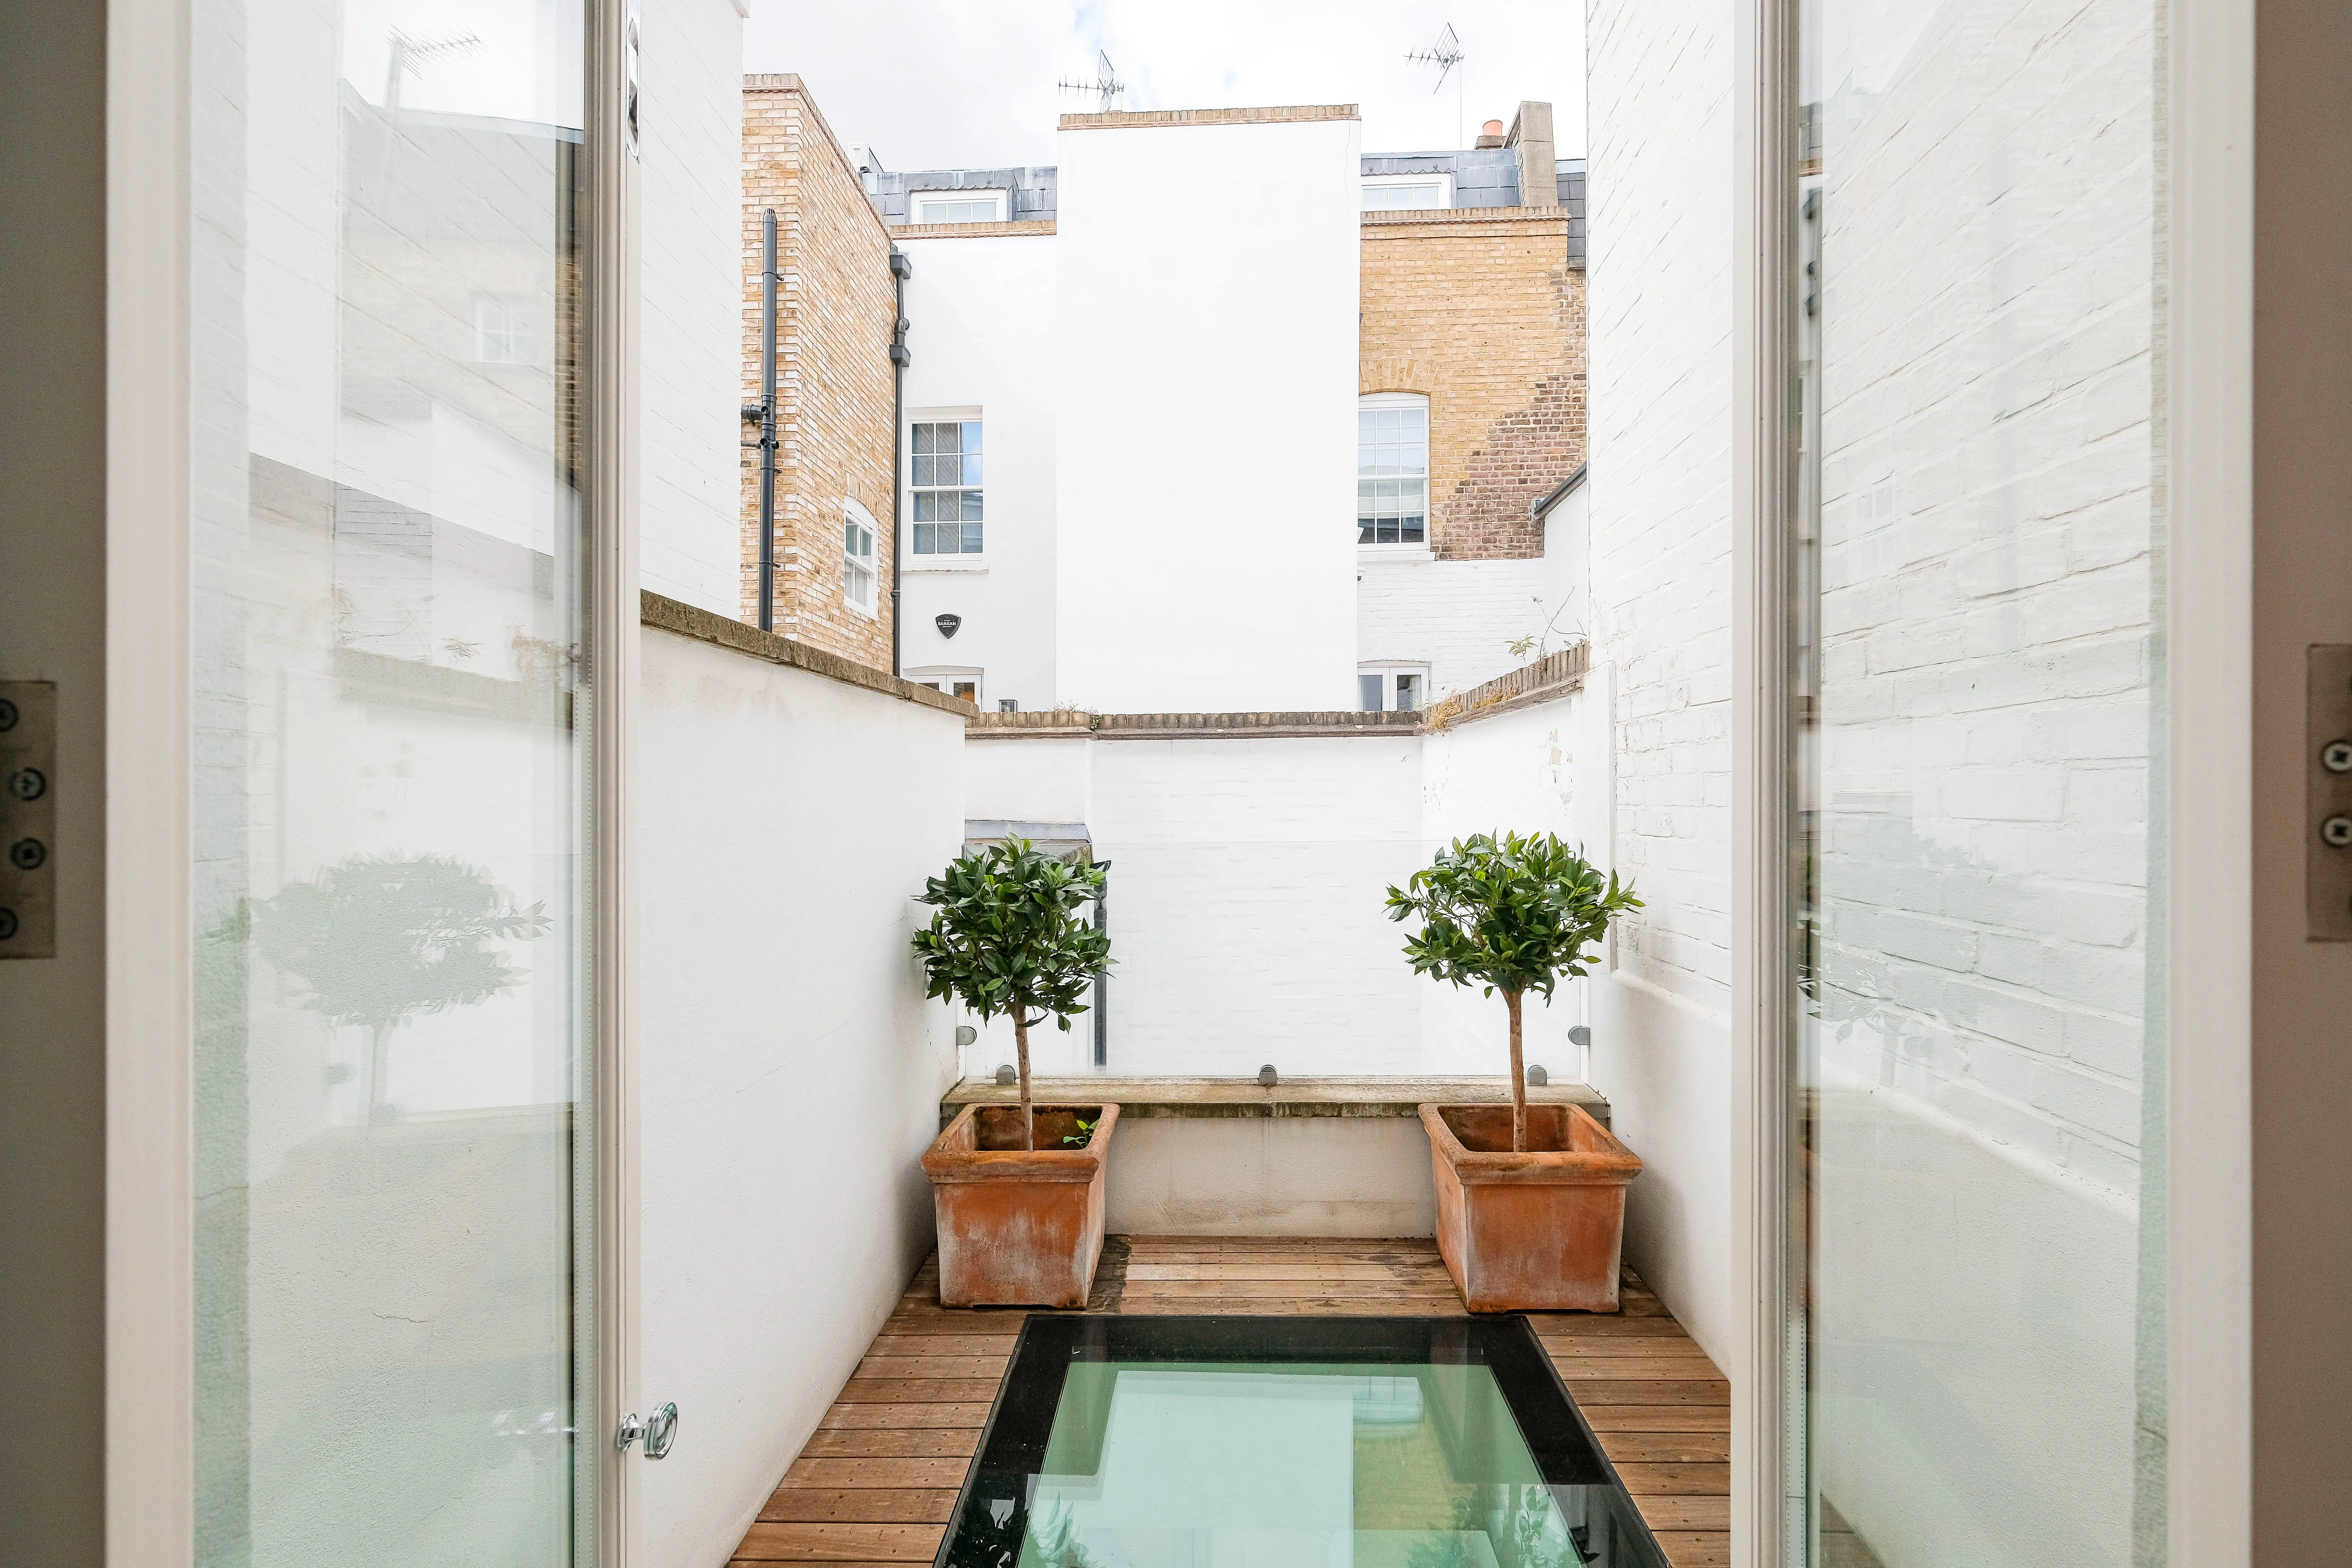 Hasker Street, holiday home in Chelsea, London